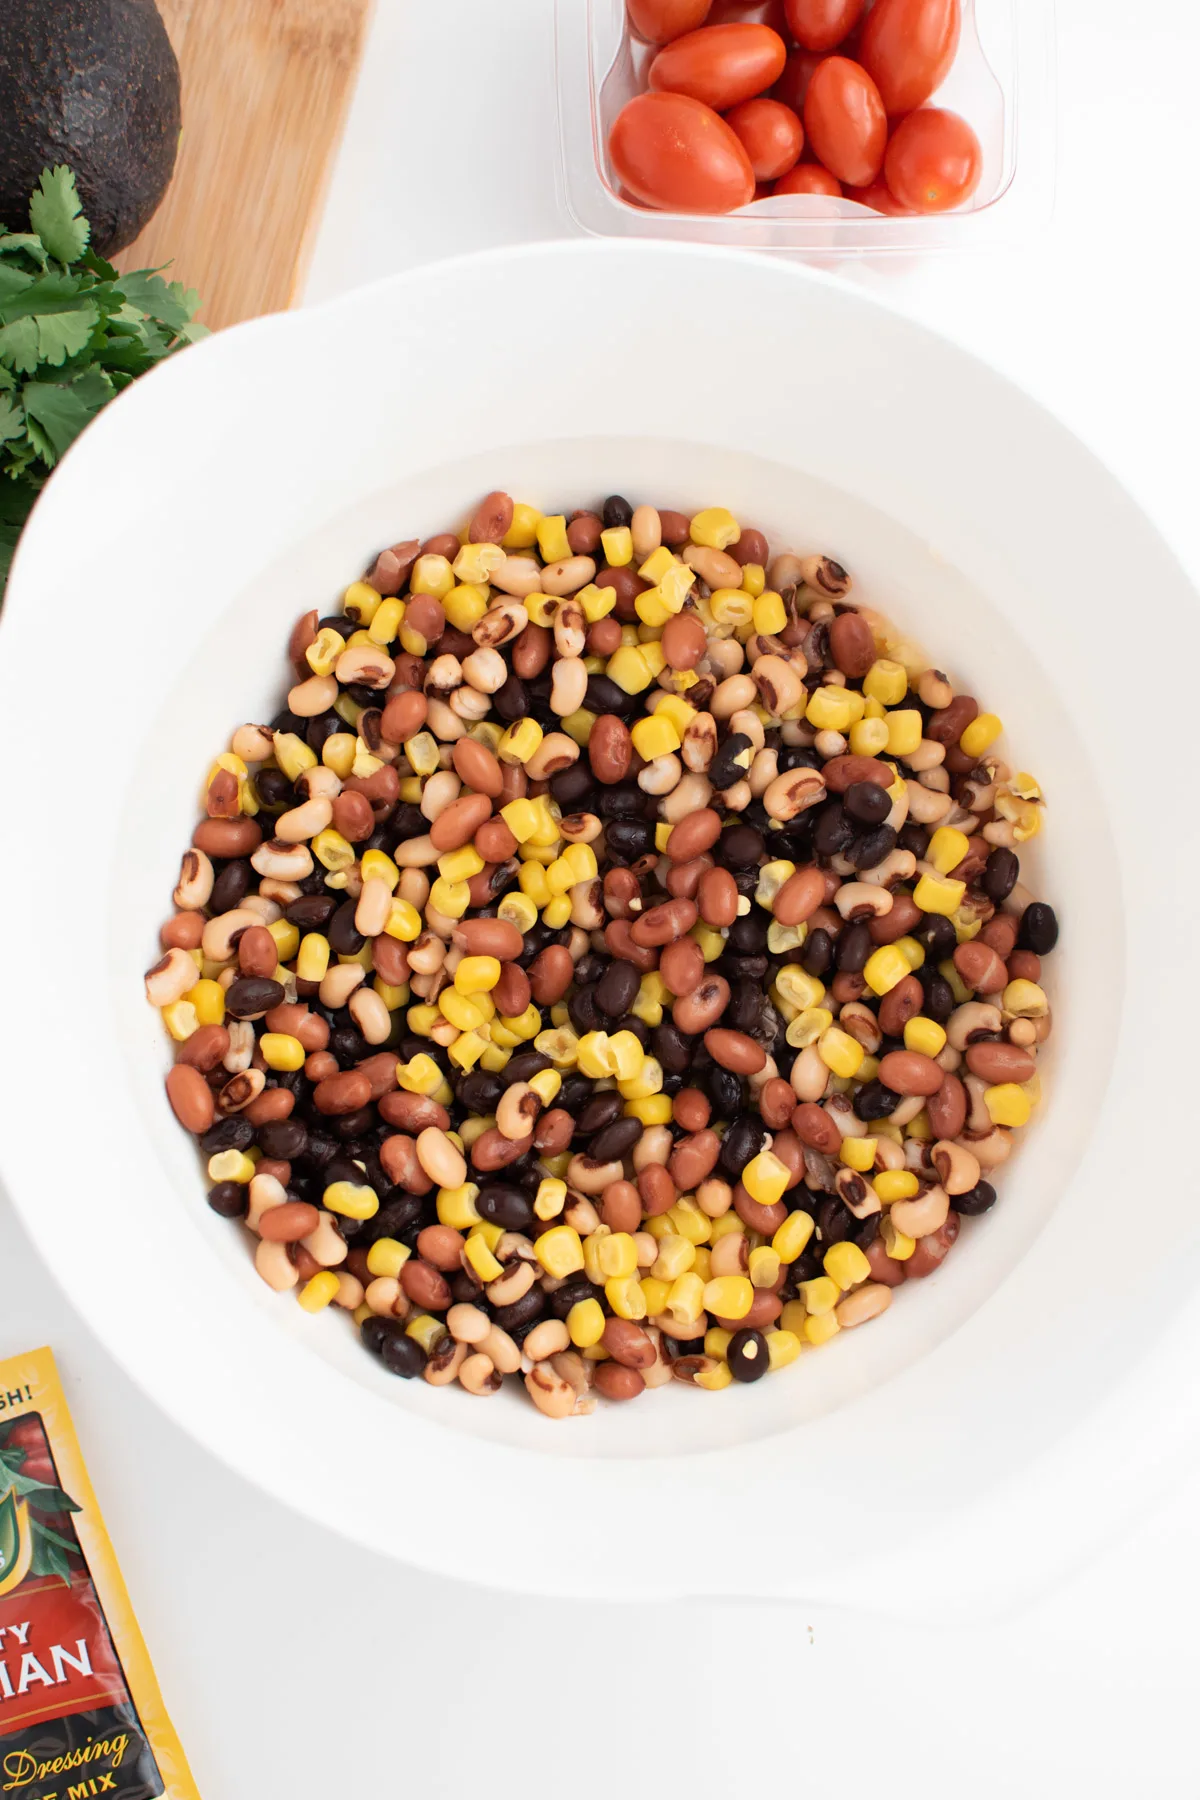 Rinsed beans and corn in large white mixing bowl to make cowboy party dip.